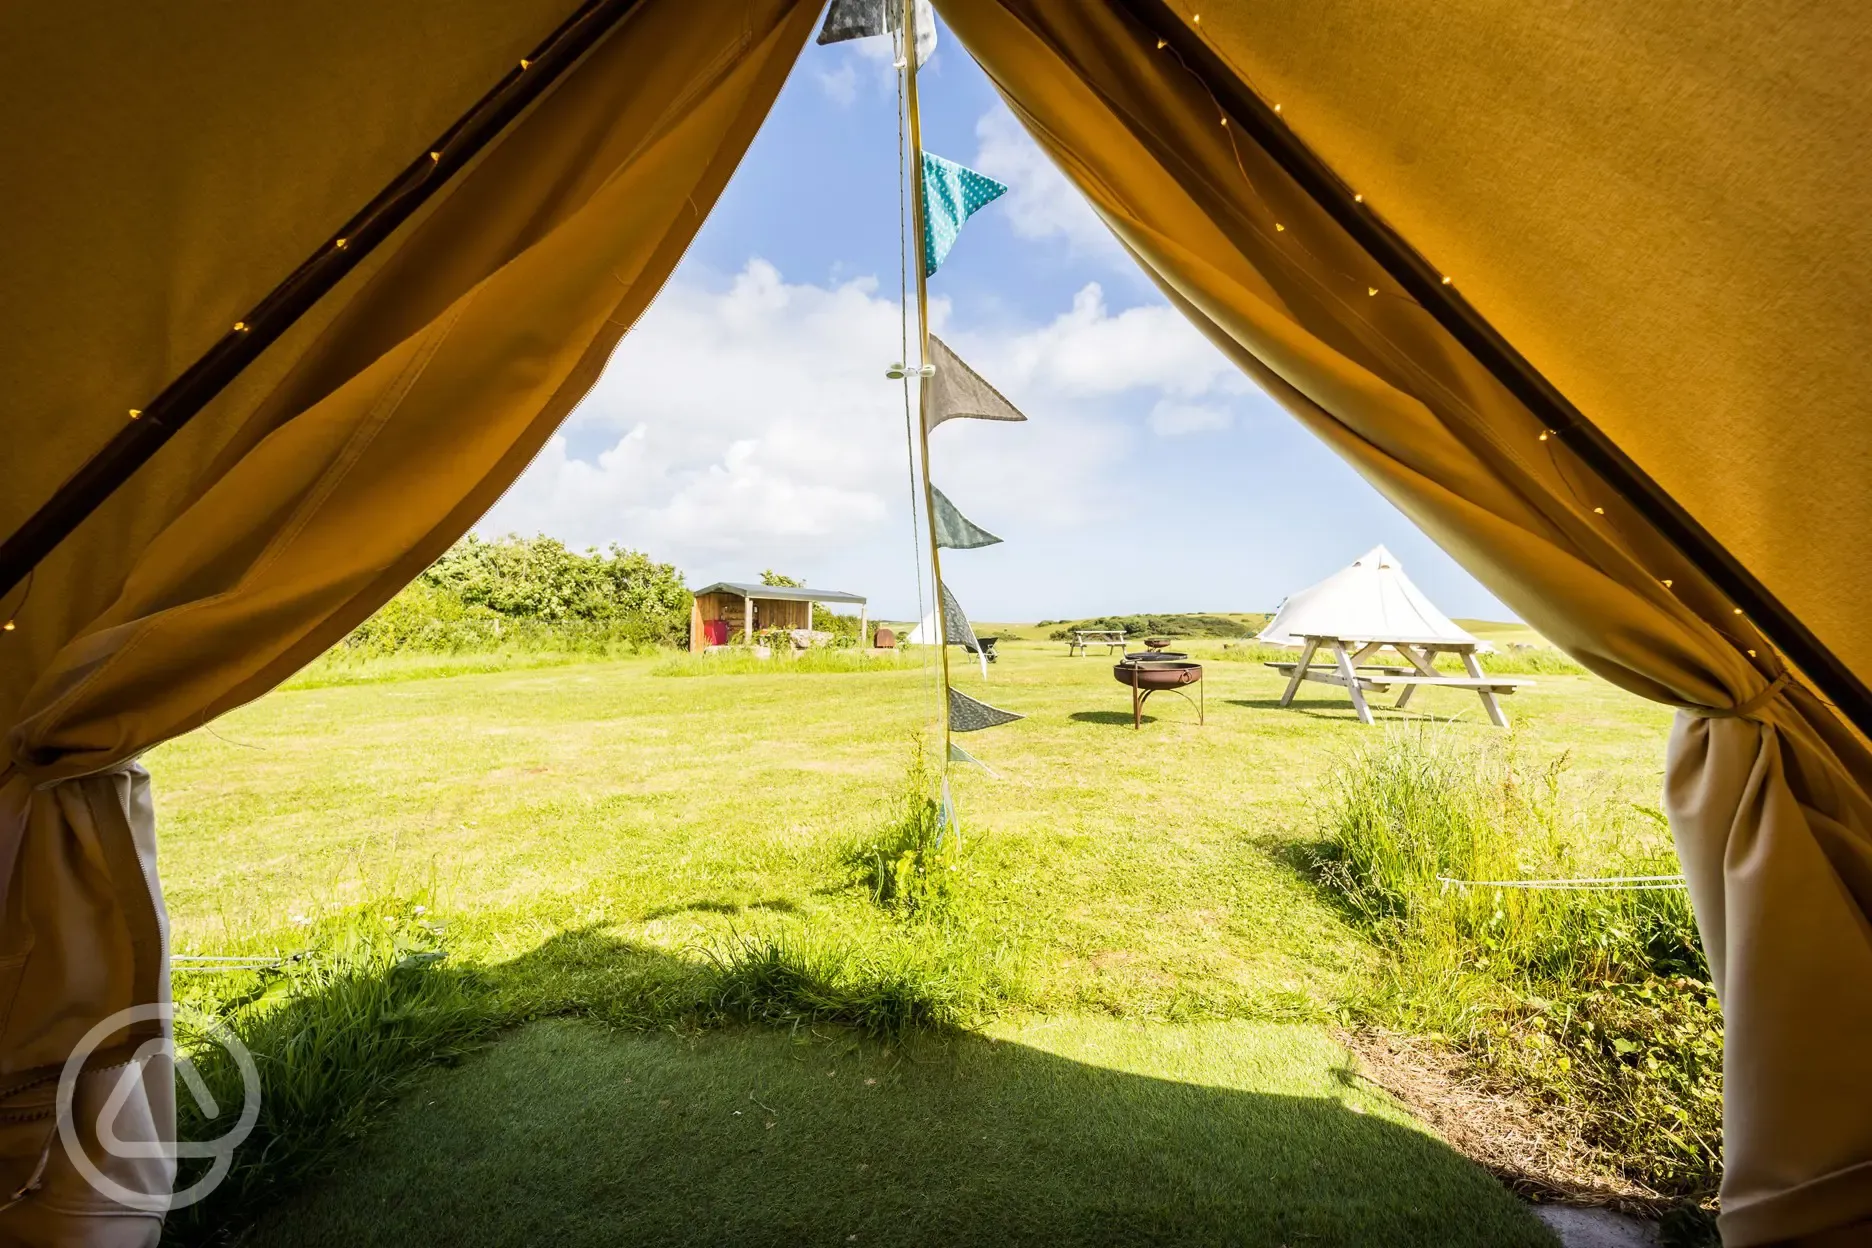 View out of one of the bell tents